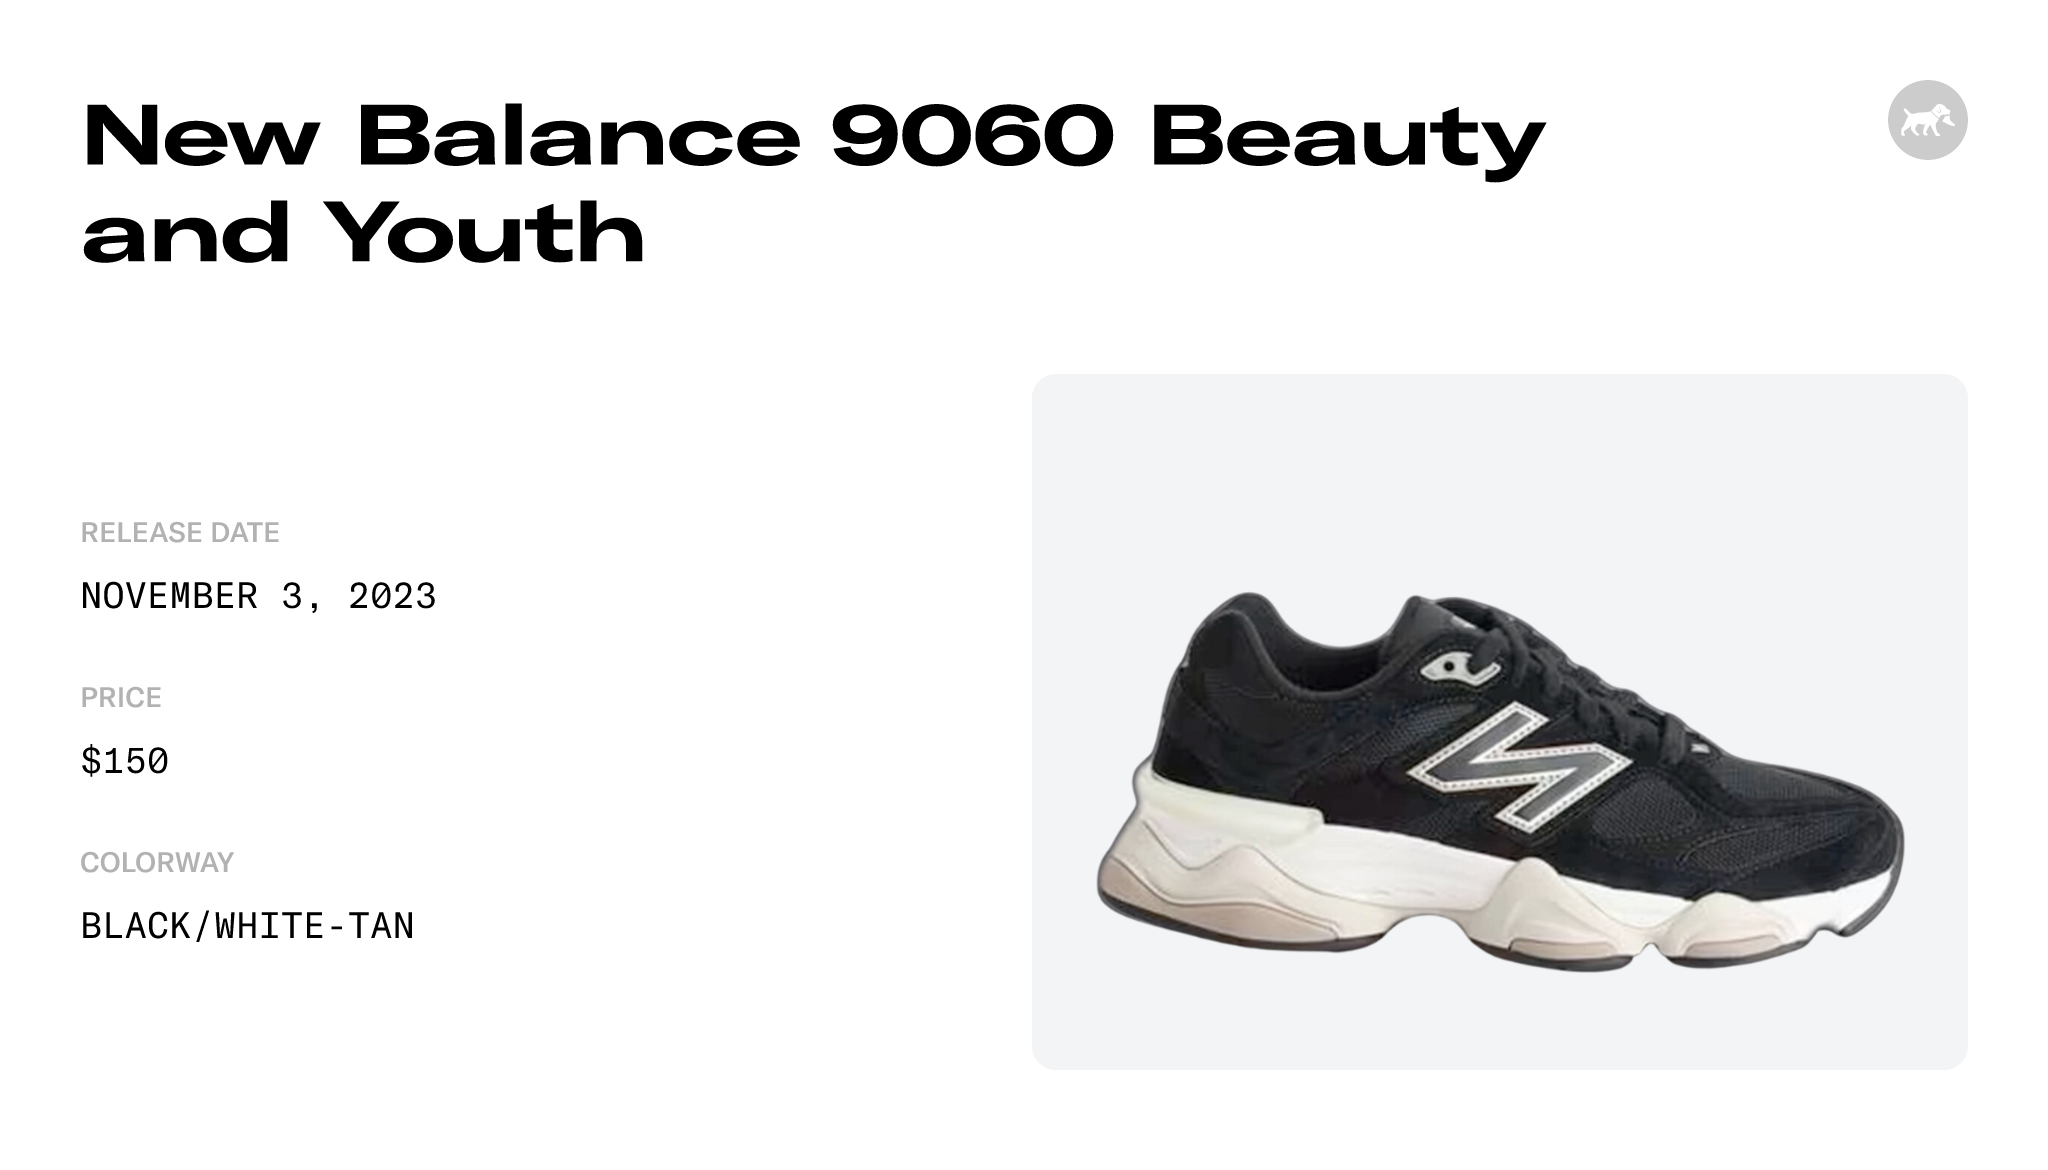 New Balance 9060 Beauty and Youth - U9060UBY Raffles and Release Date